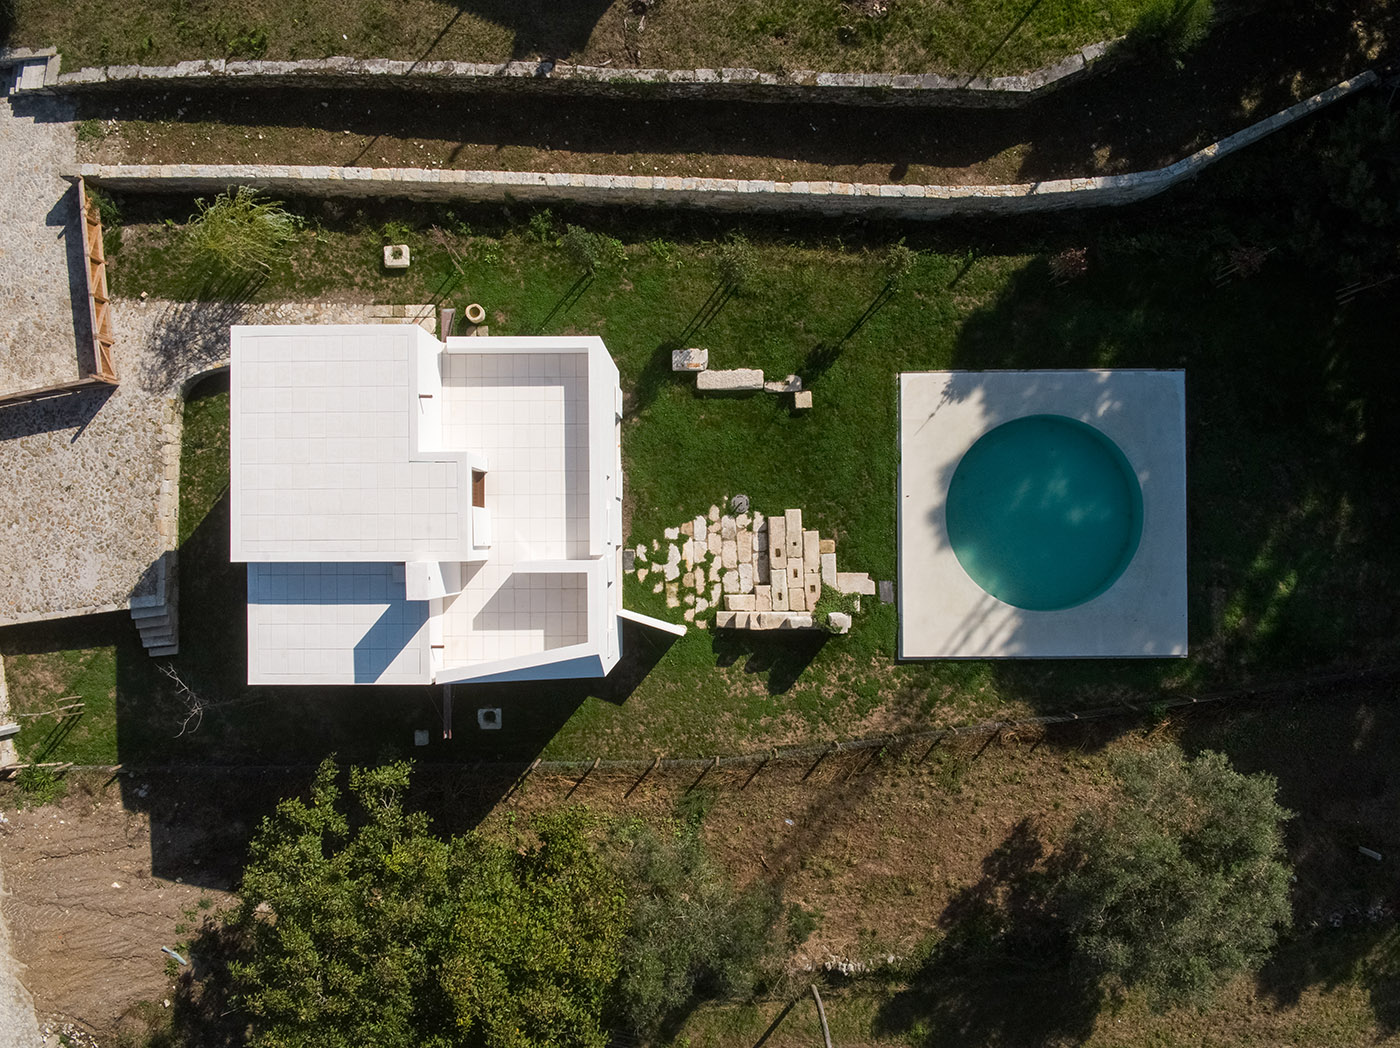 Casa em Afife. Minimalist architecture designed to blend in with the natural slopes of the land